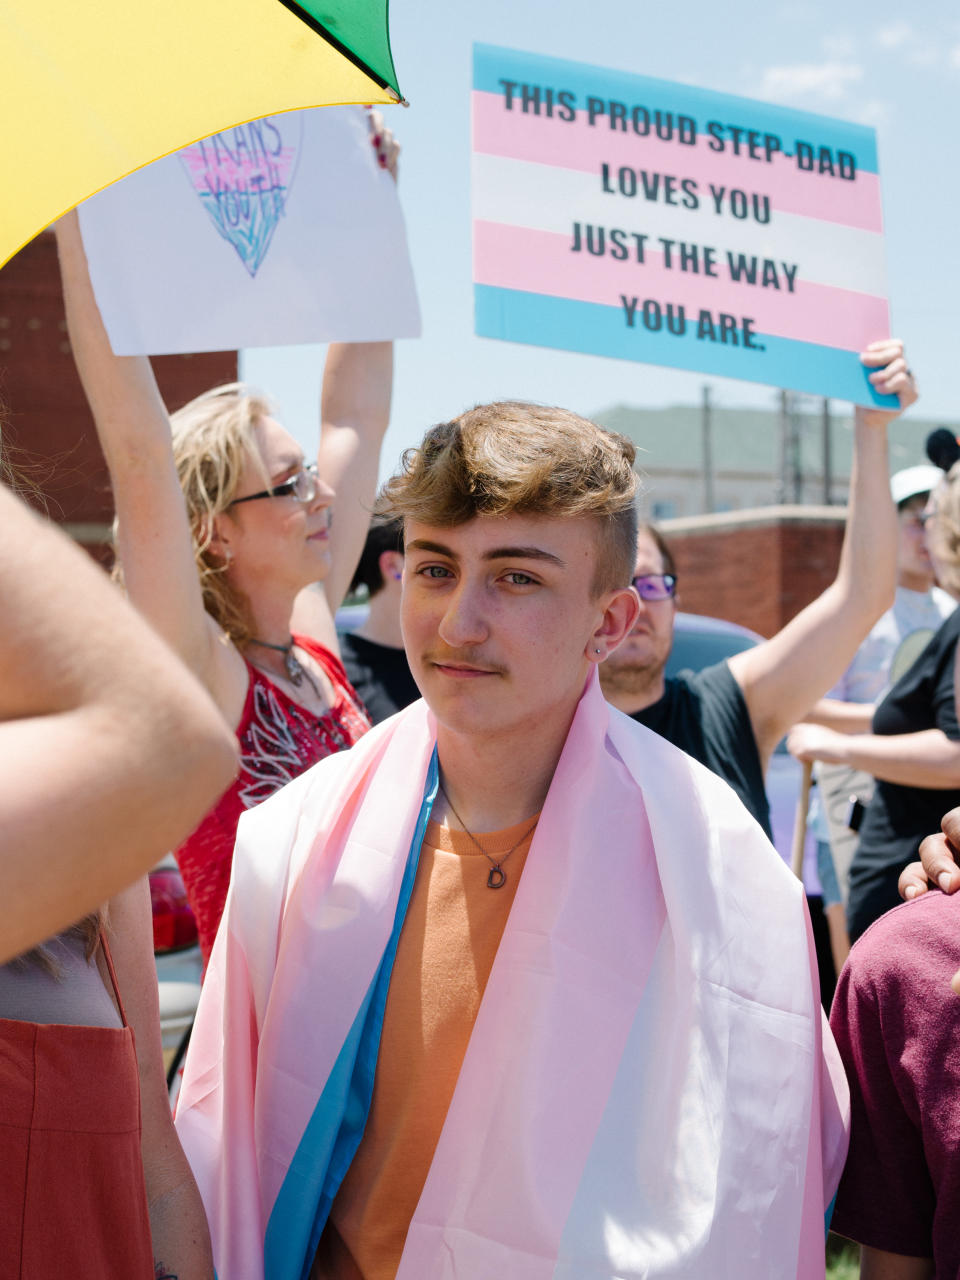 Fifteen-year-old Dylan Brandt, one of the four trans children represented in the ACLU's lawsuit, at a protest earlier this year.<span class="copyright">Courtesy of the ACLU/Rana Young</span>